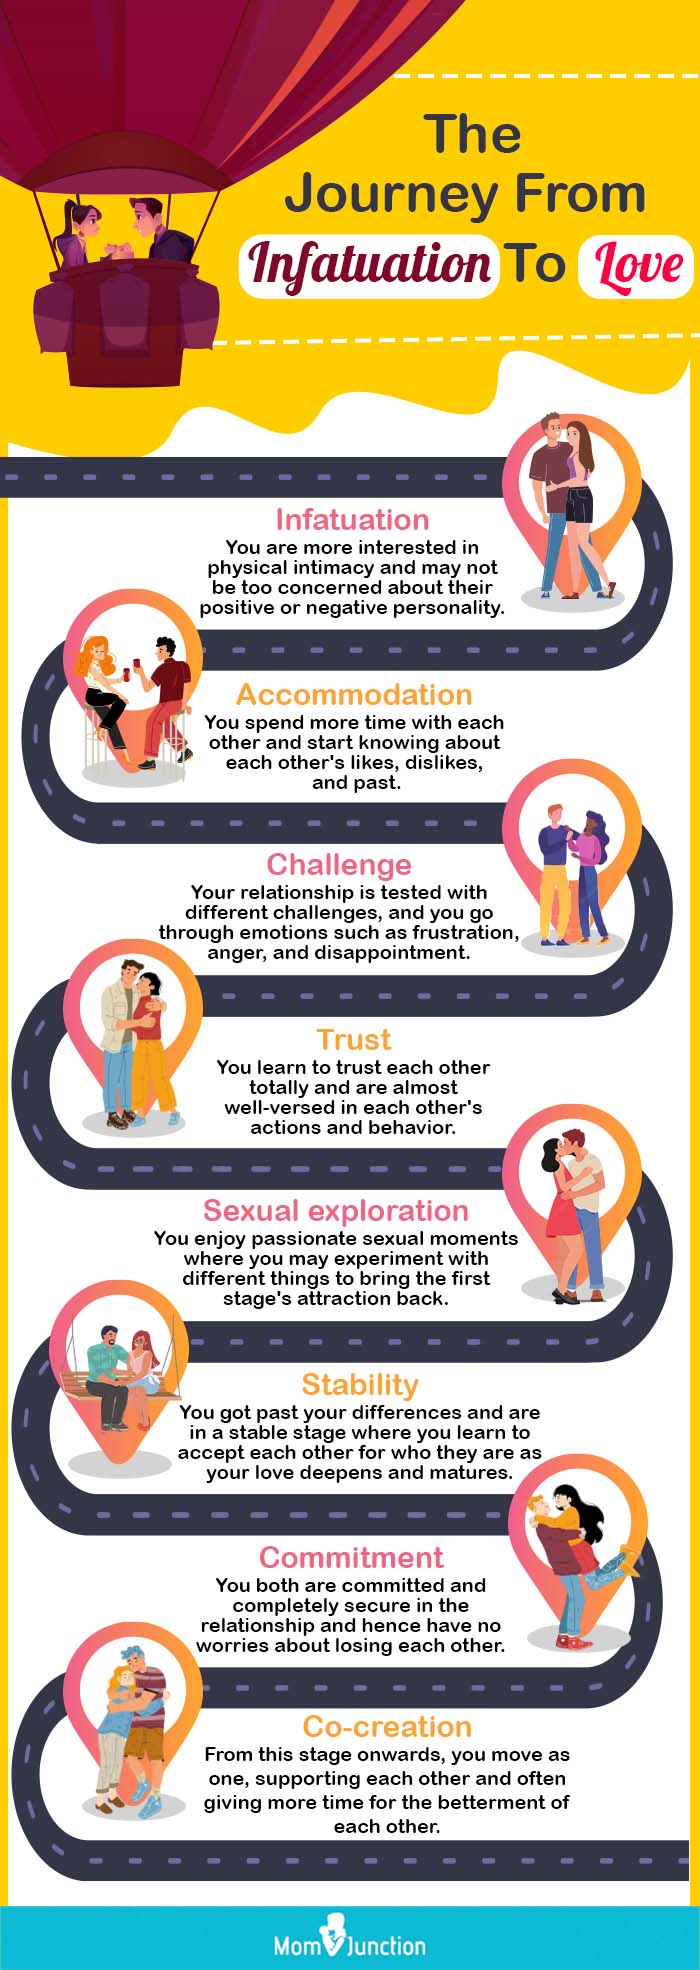 the journey from infatuation to love (infographic)